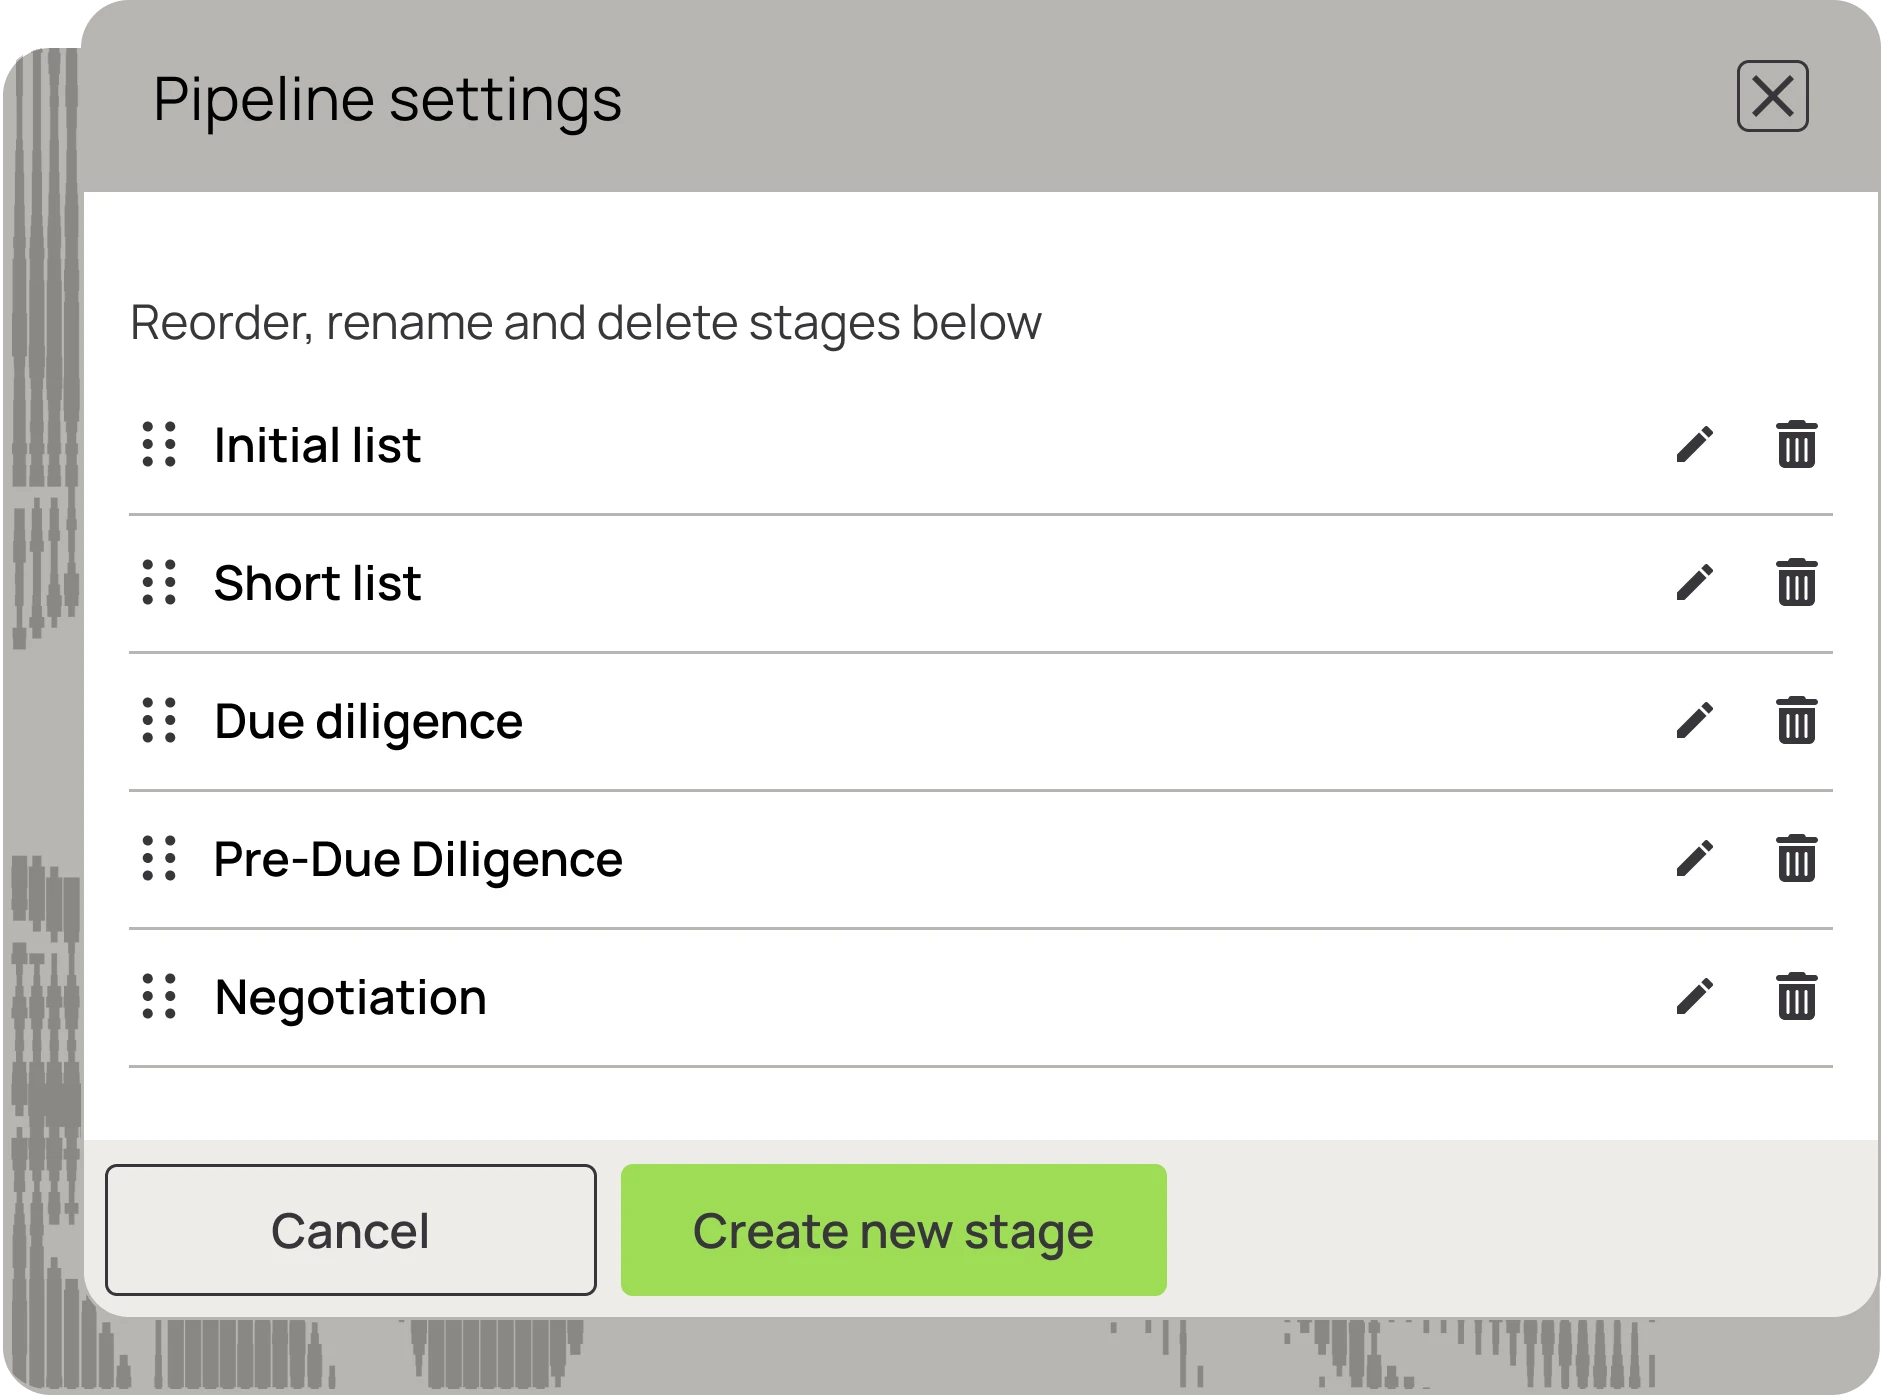 You can easily customize the settings to match your needs.